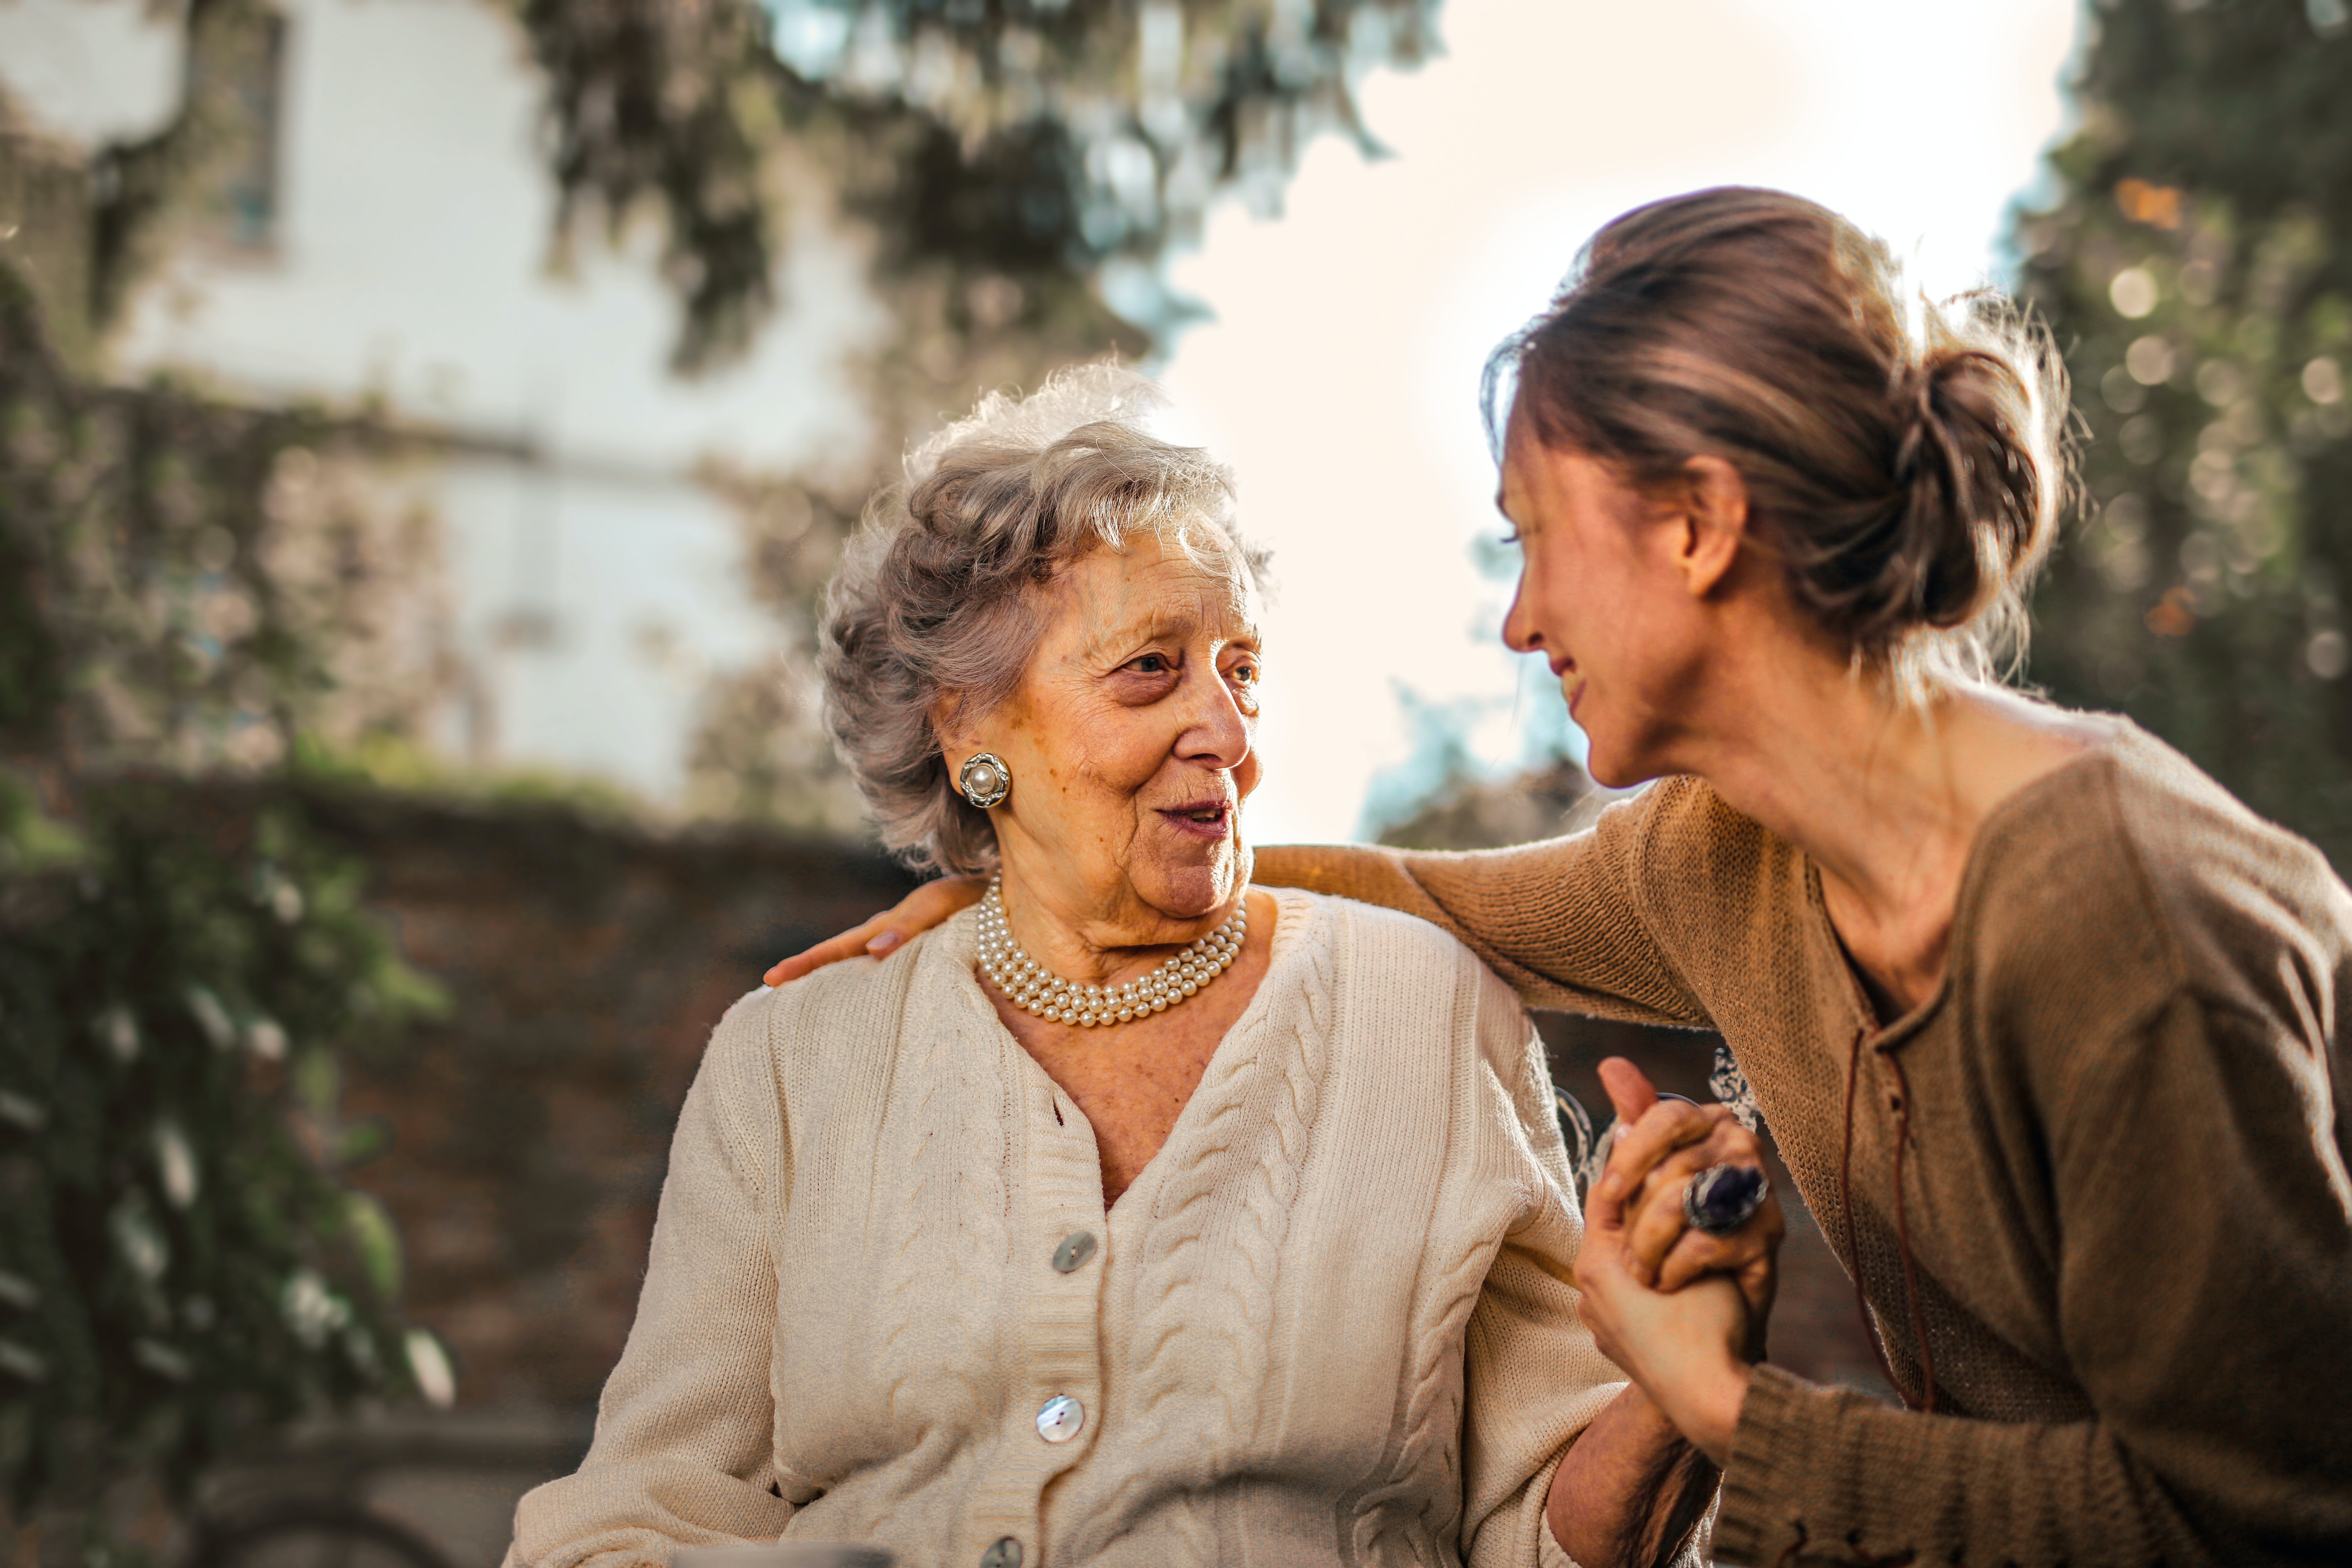 Mother and daughter hanging out. | Source: Pexels